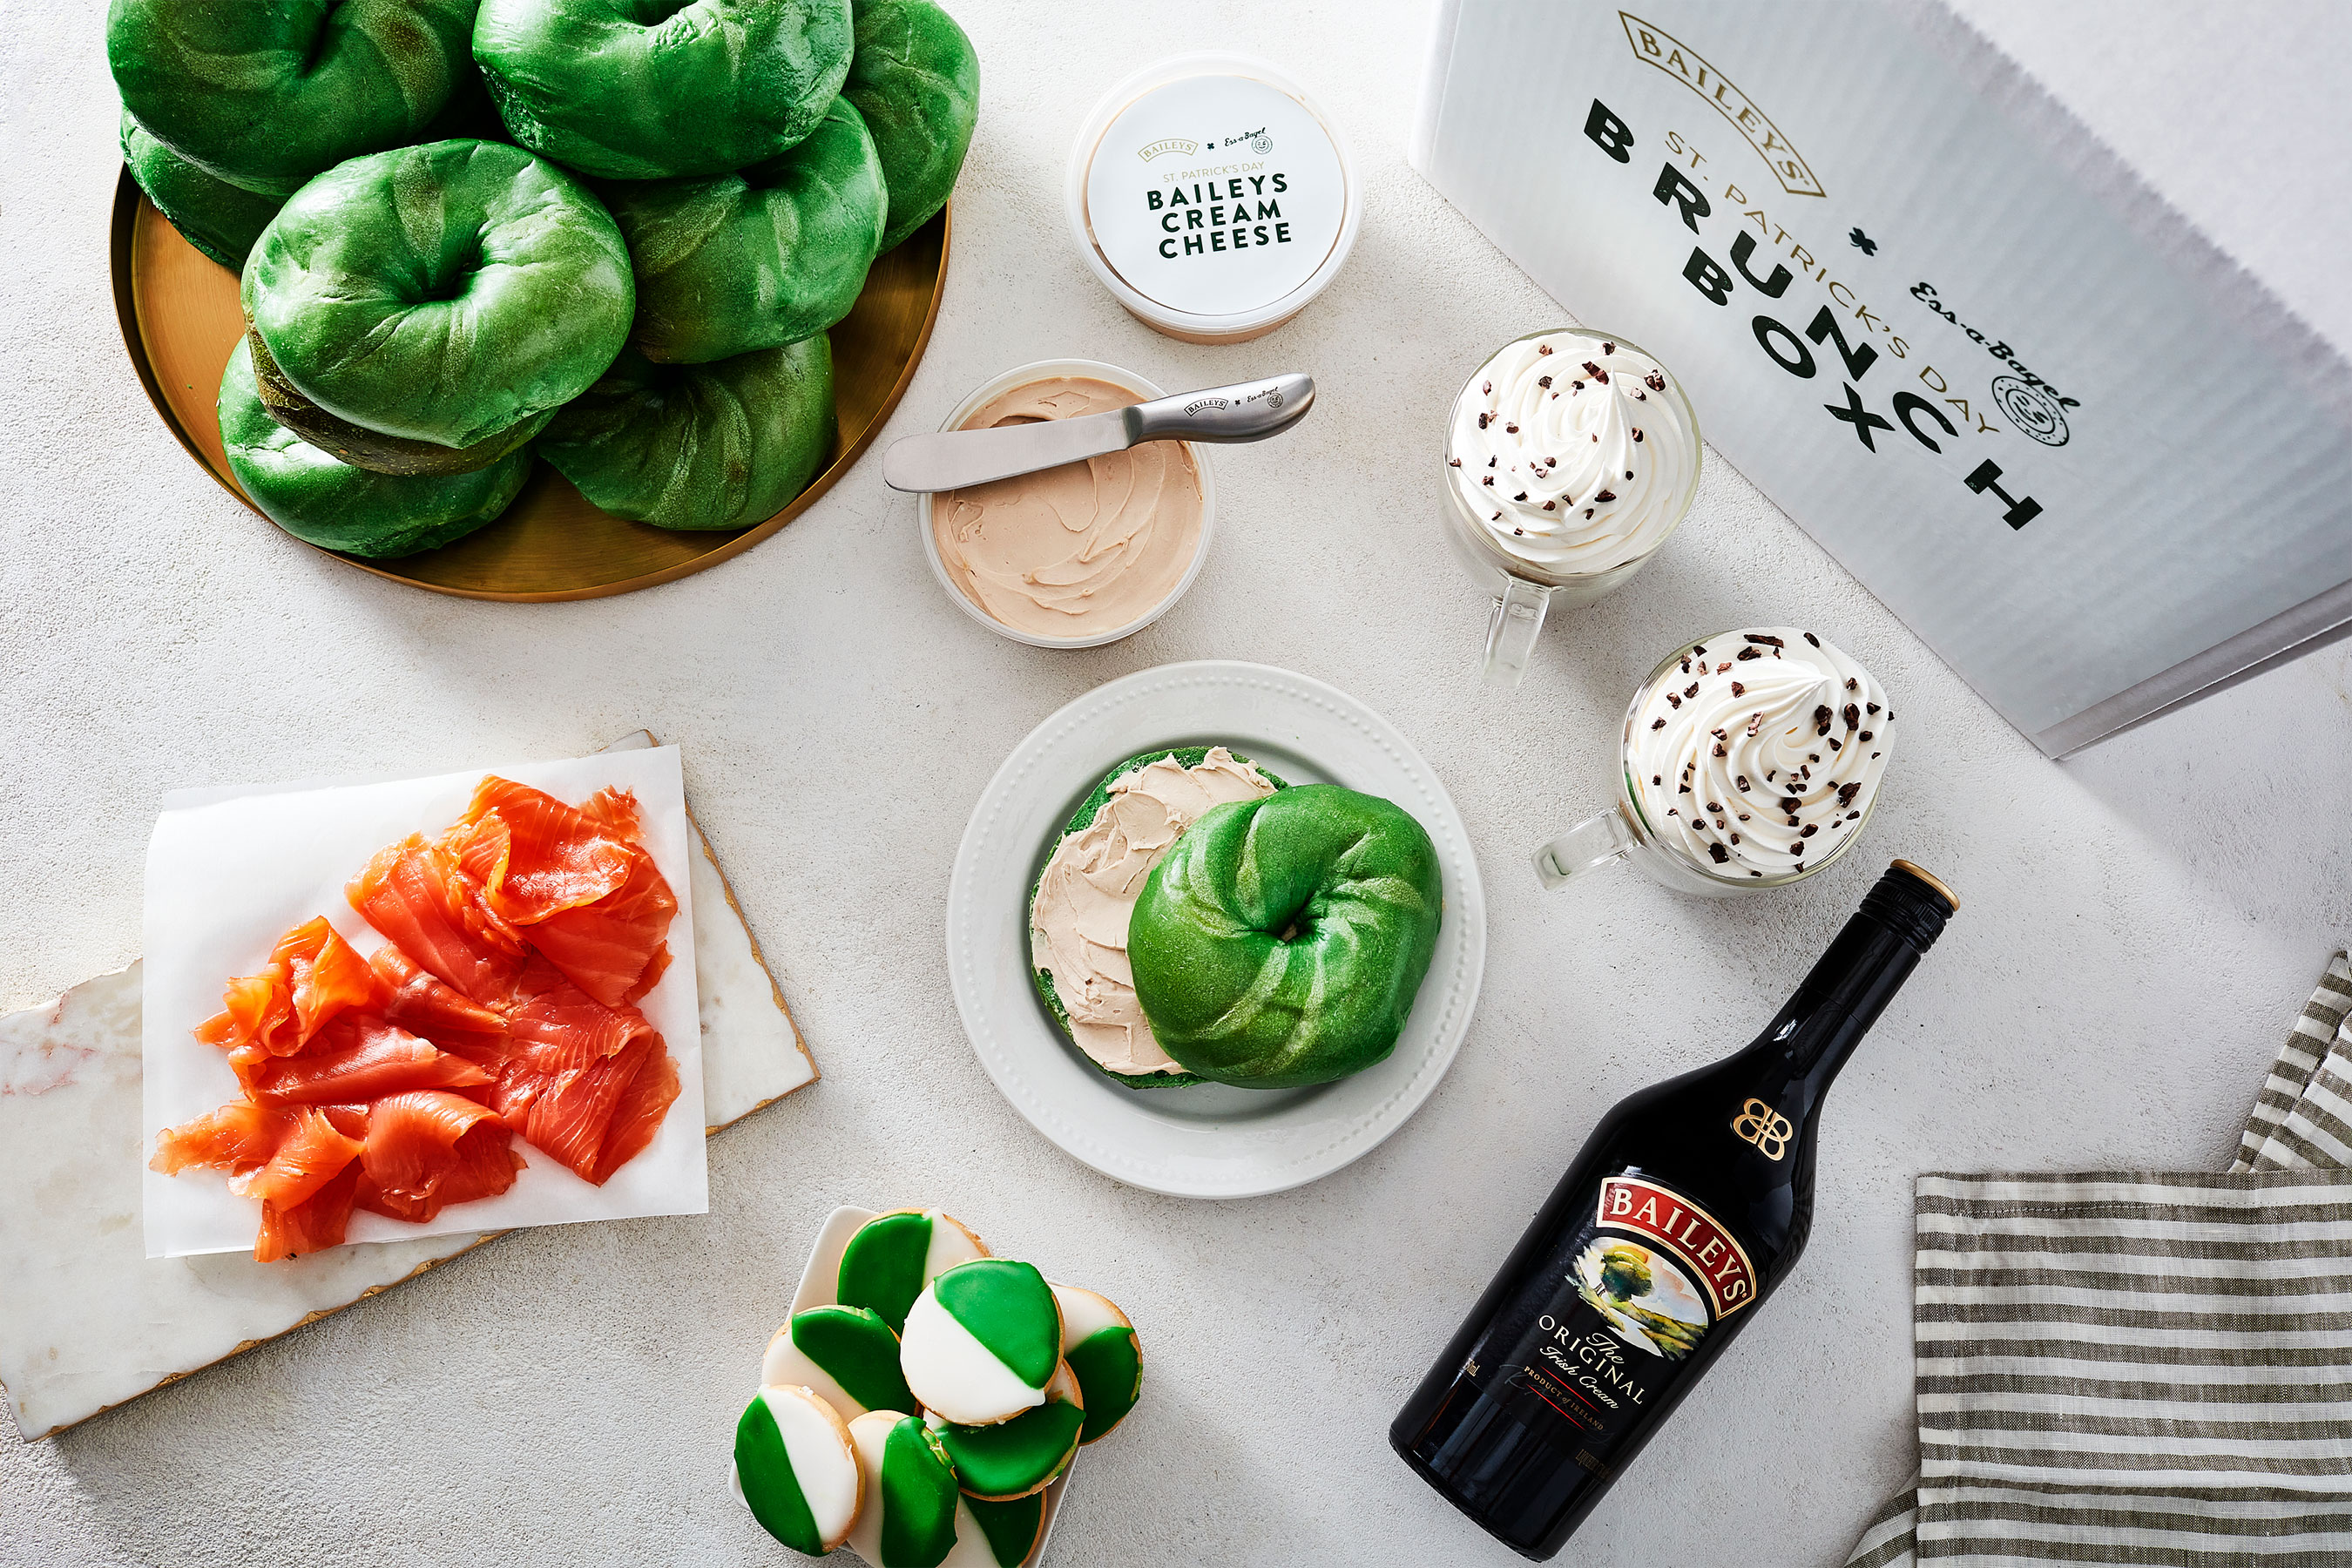 Baileys Original Irish Cream Liqueur is partnering with iconic New York-based bagel institution, Ess-a-Bagel, to level up your St. Patrick’s Day Brunch!